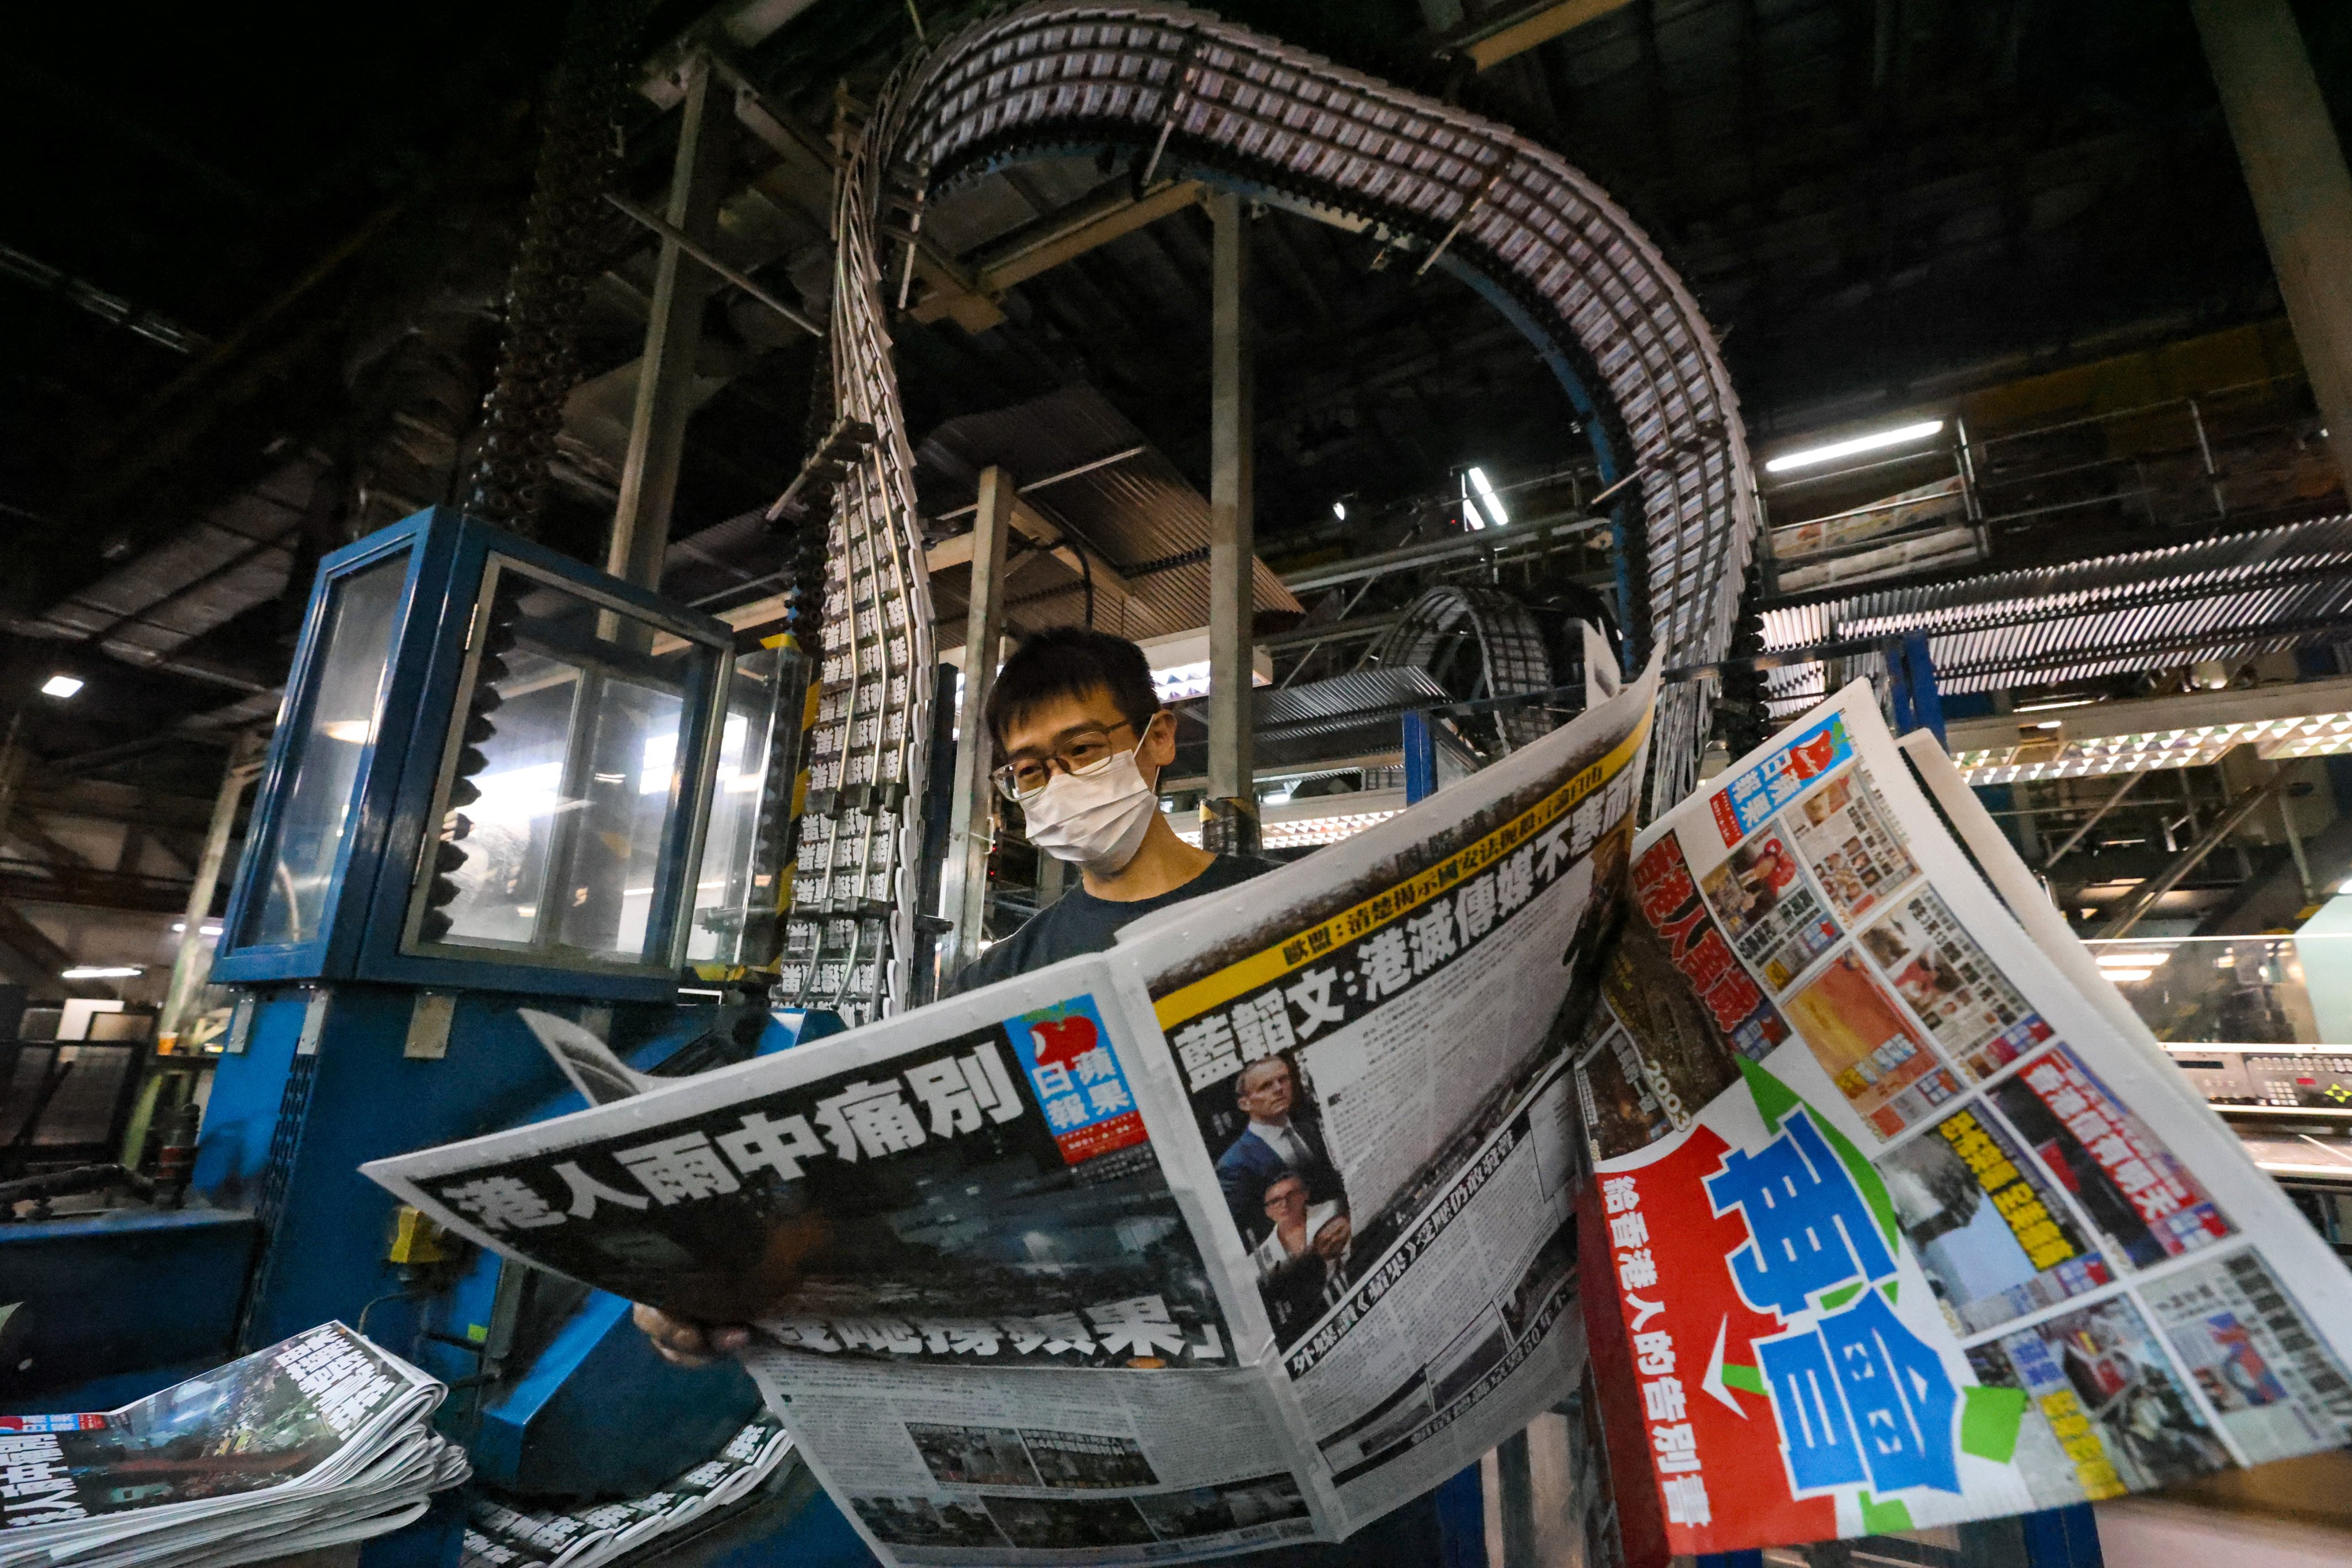 Apple Daily’s printing press. Jimmy Lai radicalised the tabloid after the 2019 anti-government protests, a court has heard. Photo: Dickson Lee